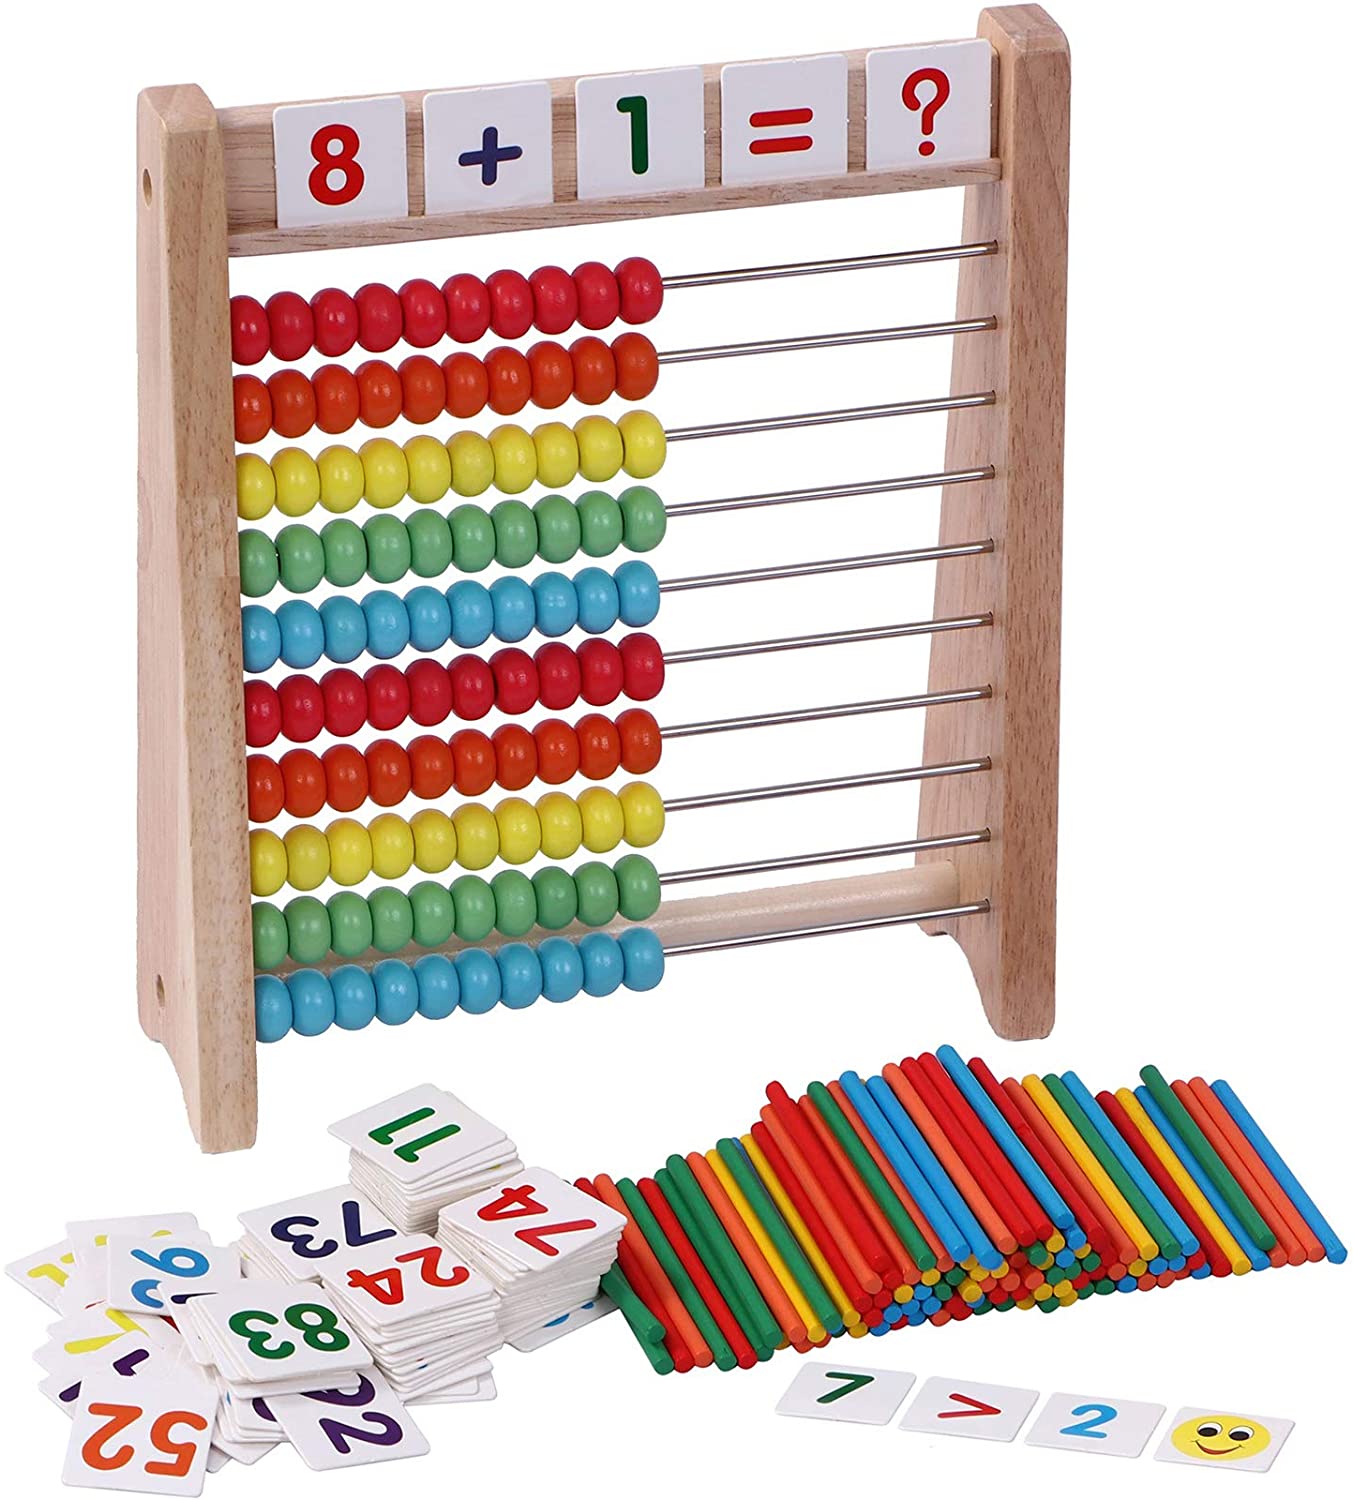 Kid Education Toys Wooden Counting Sticks Preschool Math Number Learning Game 